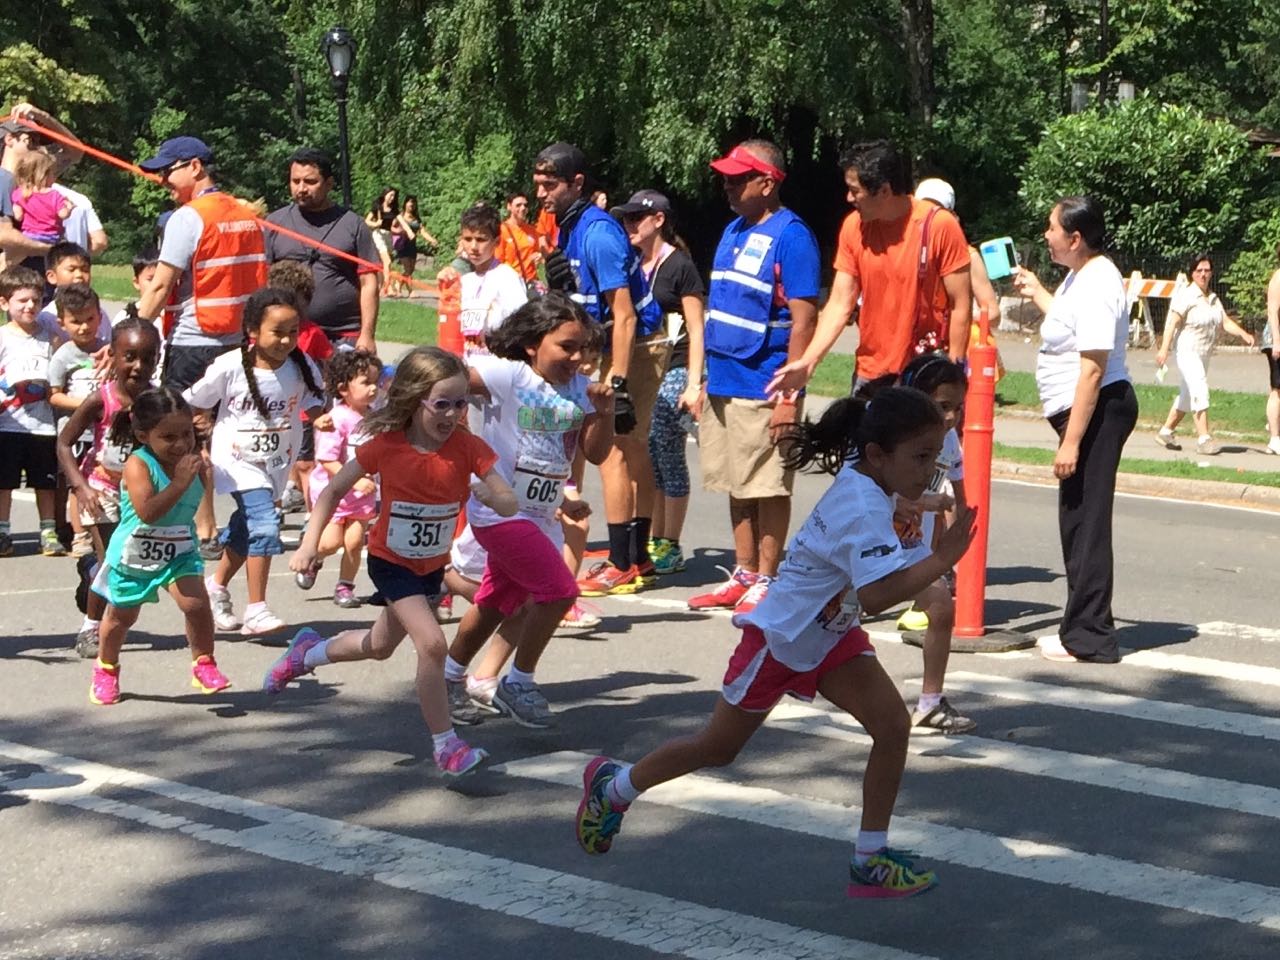 Young girls run at the Achilles Hope and Possibility 2014 race events in New York Central Park.